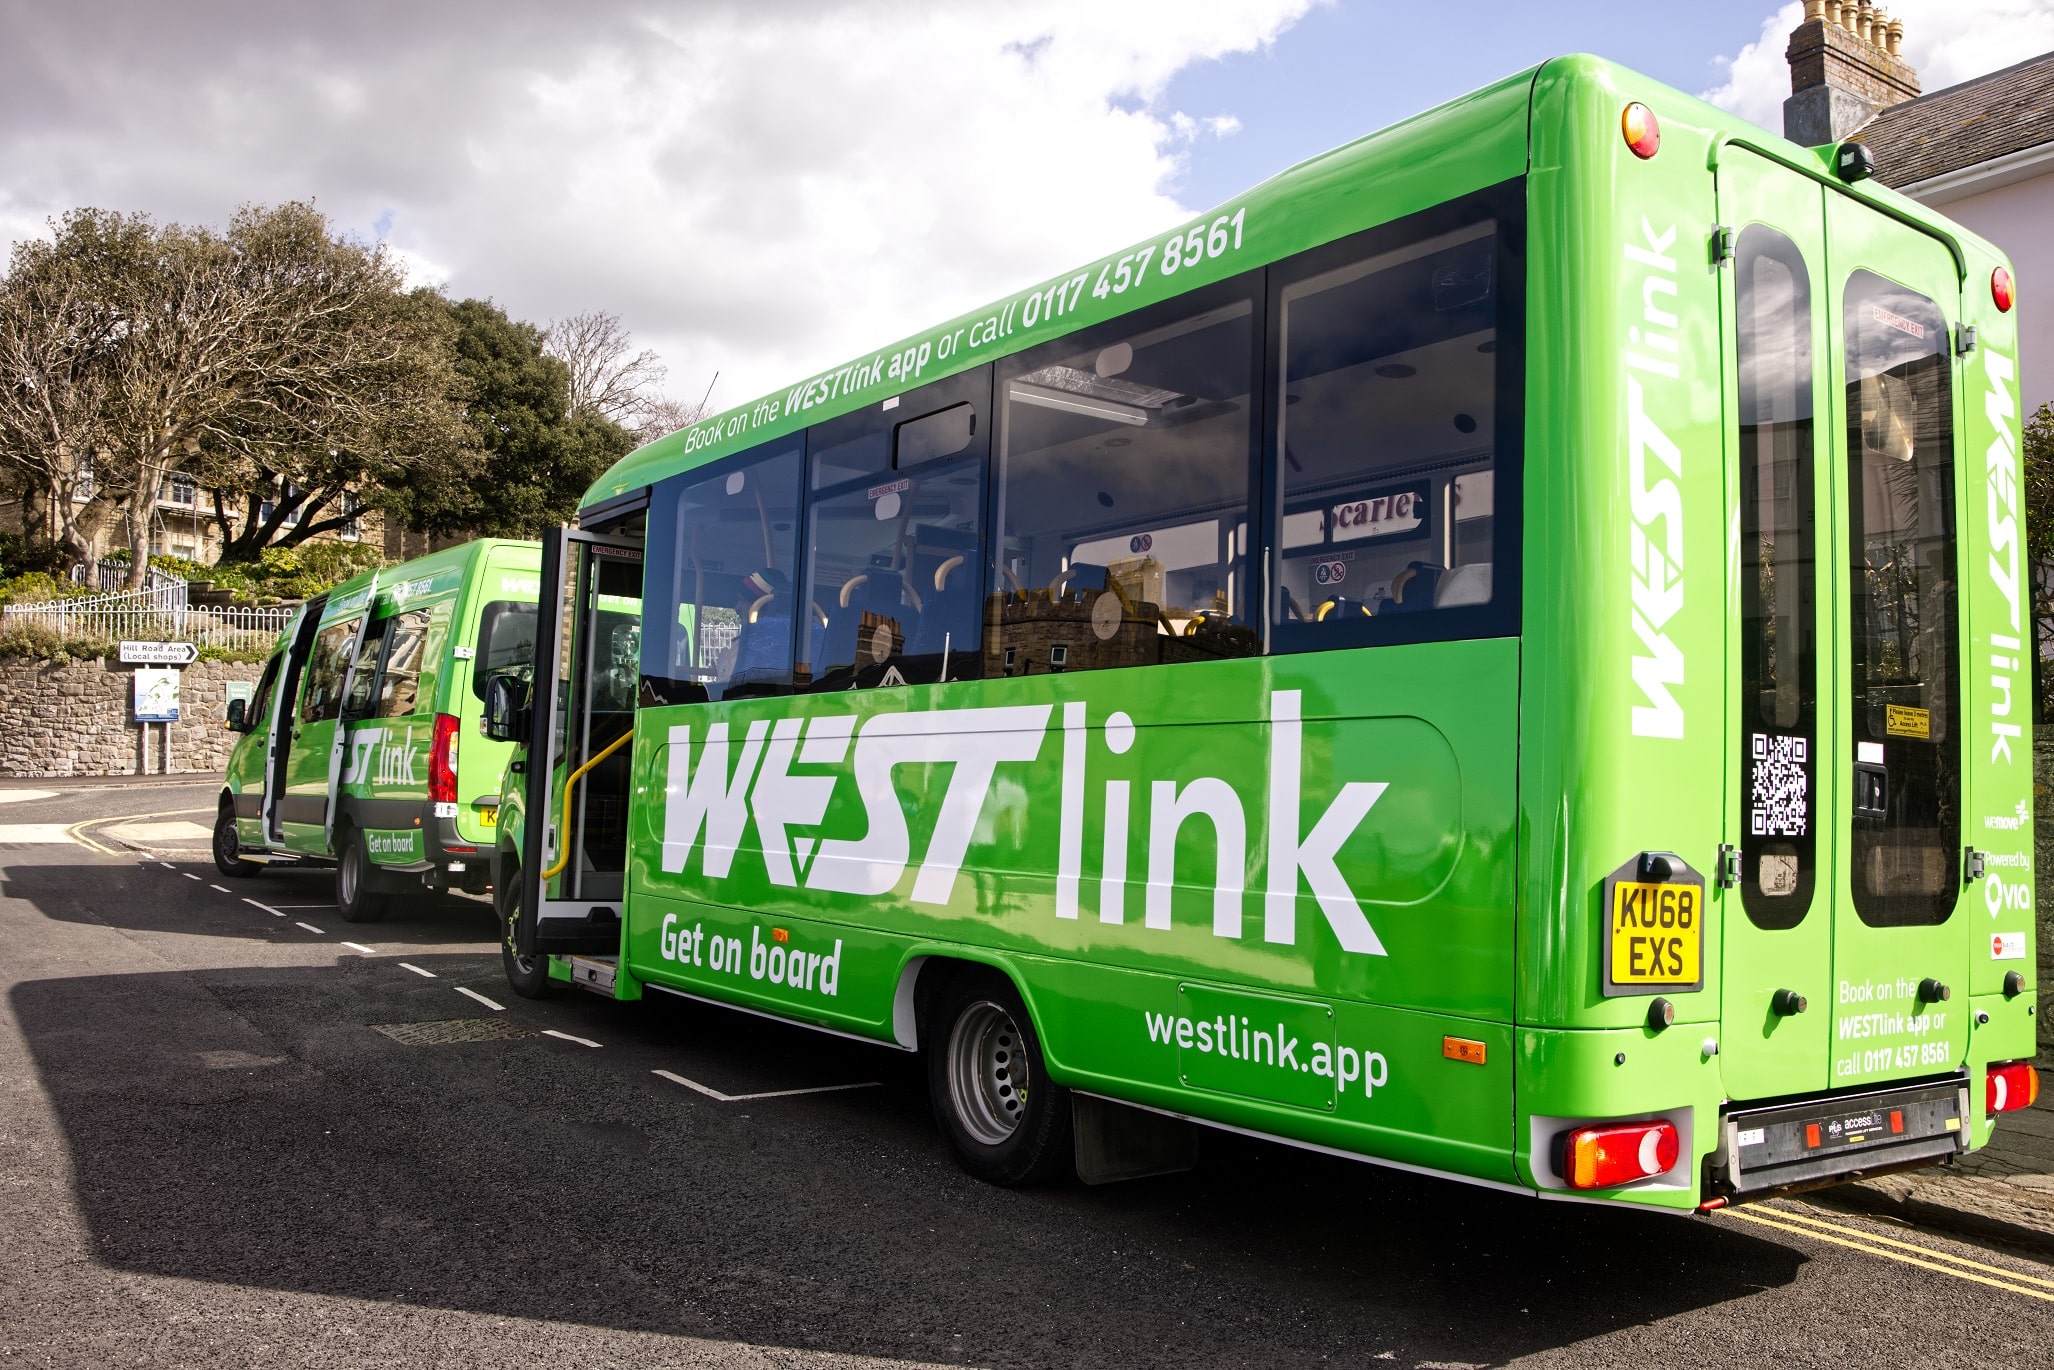 WESTlink minibuses can be recognised by their bright green colour. Credit Nodpics Photography